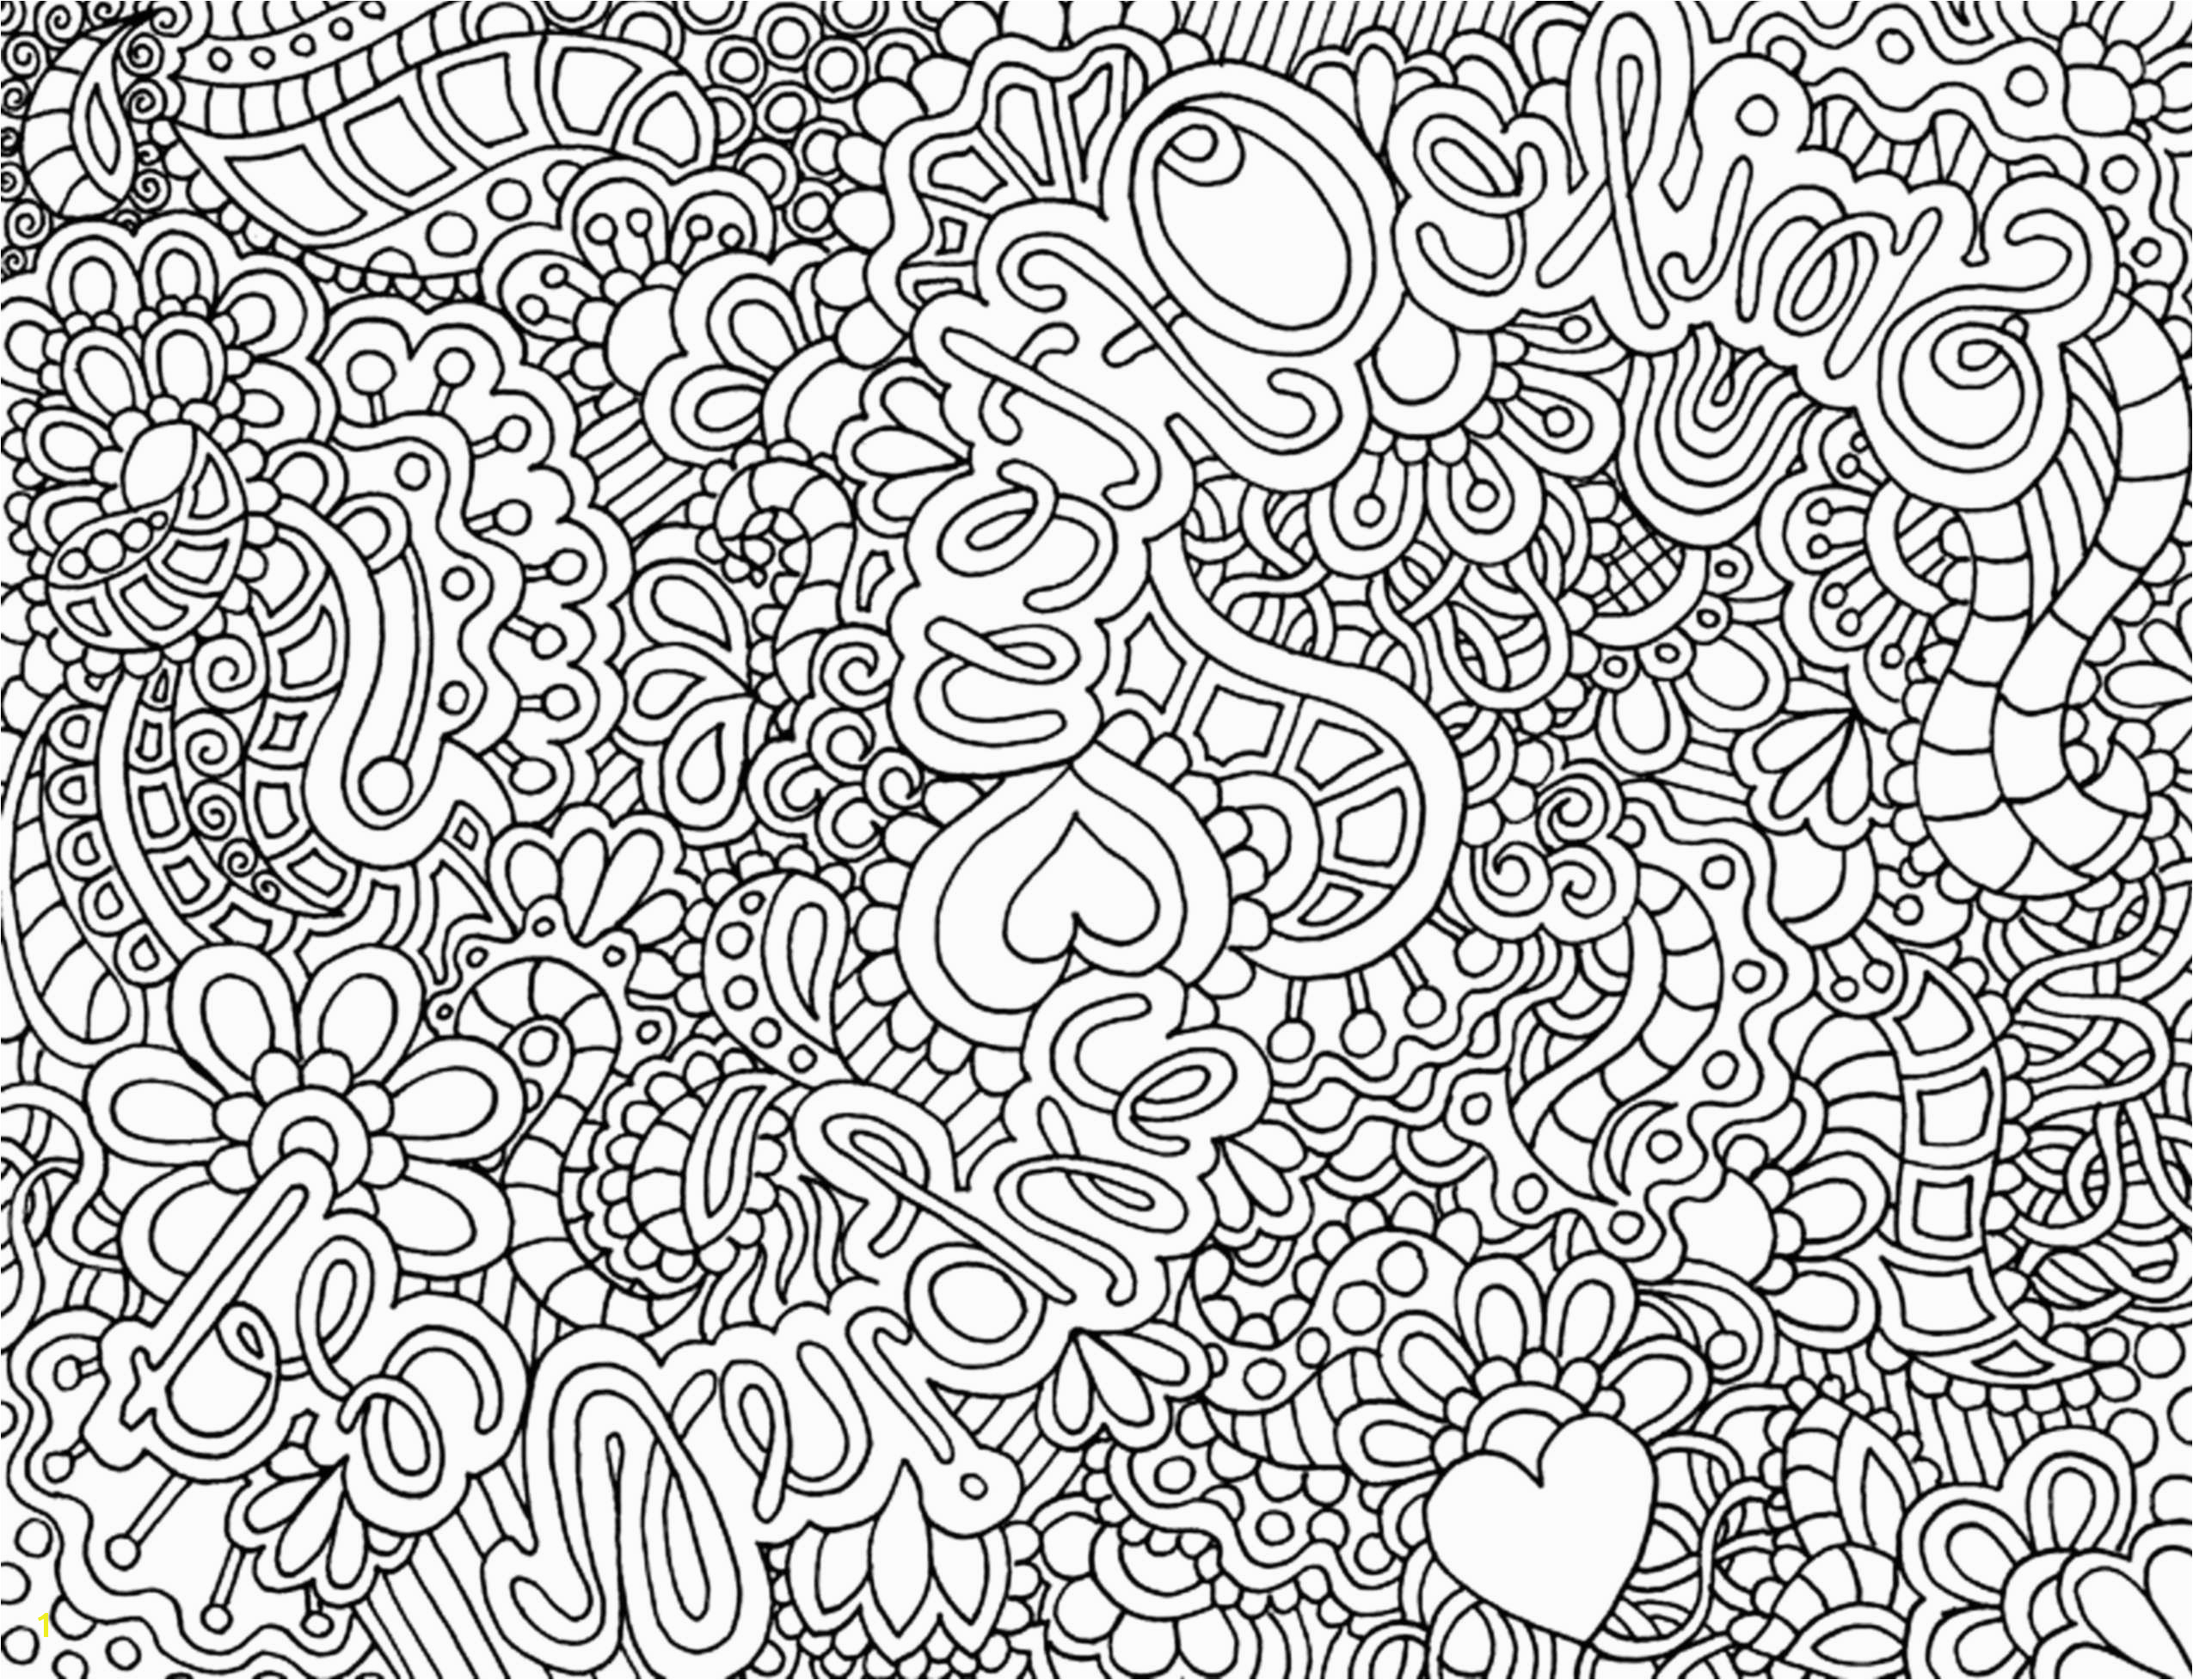 Abstract Coloring Pages for Teenagers Difficult Abstract Coloring Pages for Teenagers Difficult Awesome Plicated Coloring